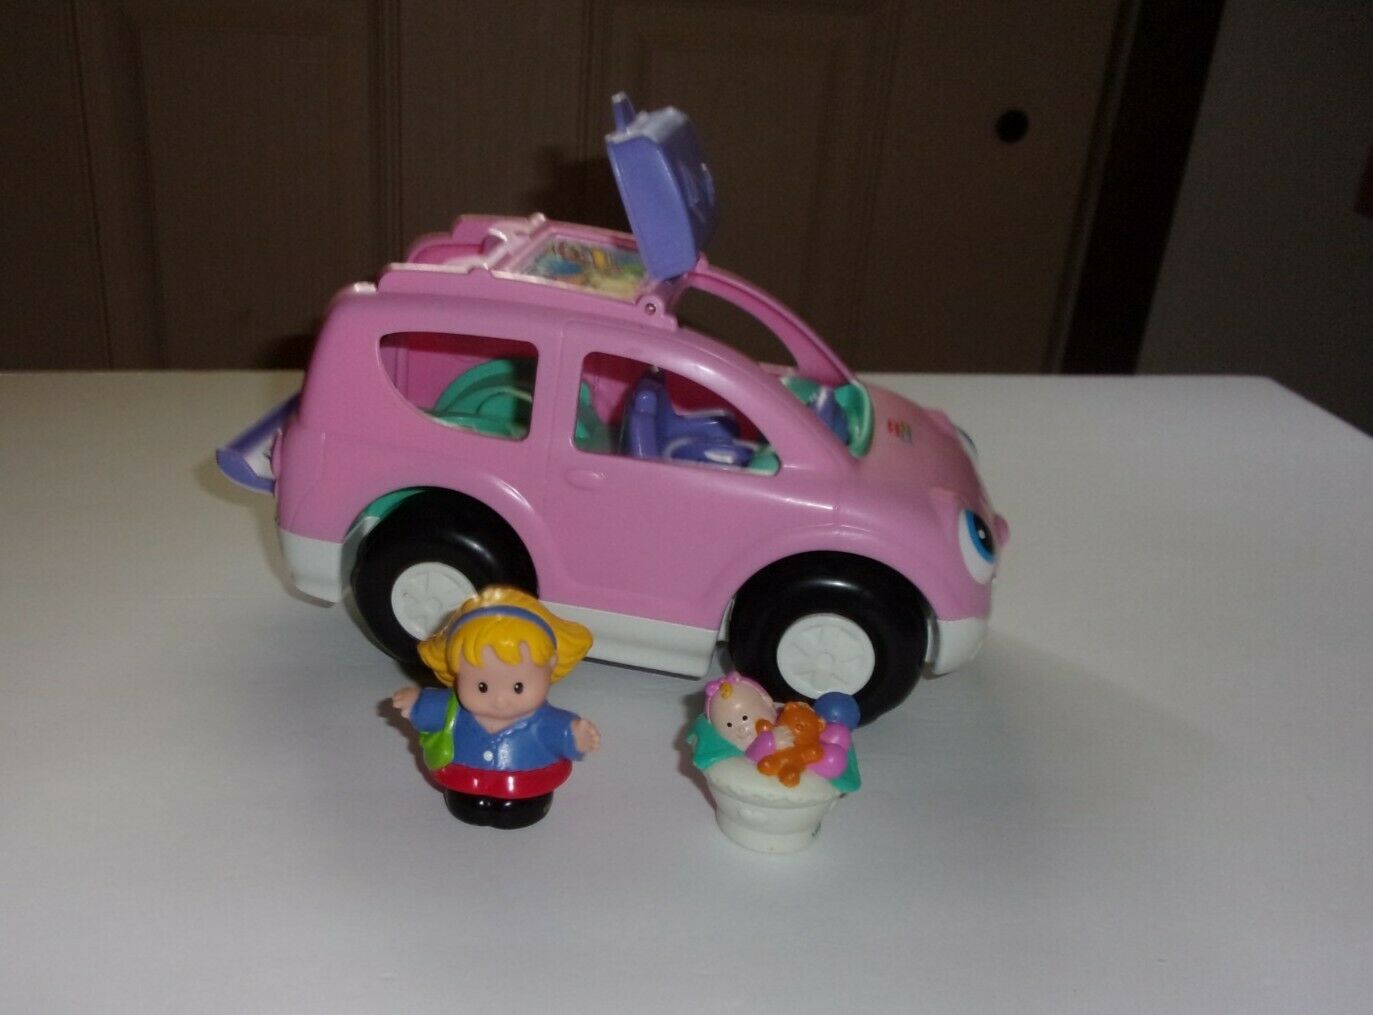 Little Peoples Fisher Price Pink Mini Van Suv Car With Sounds. Mom And Baby